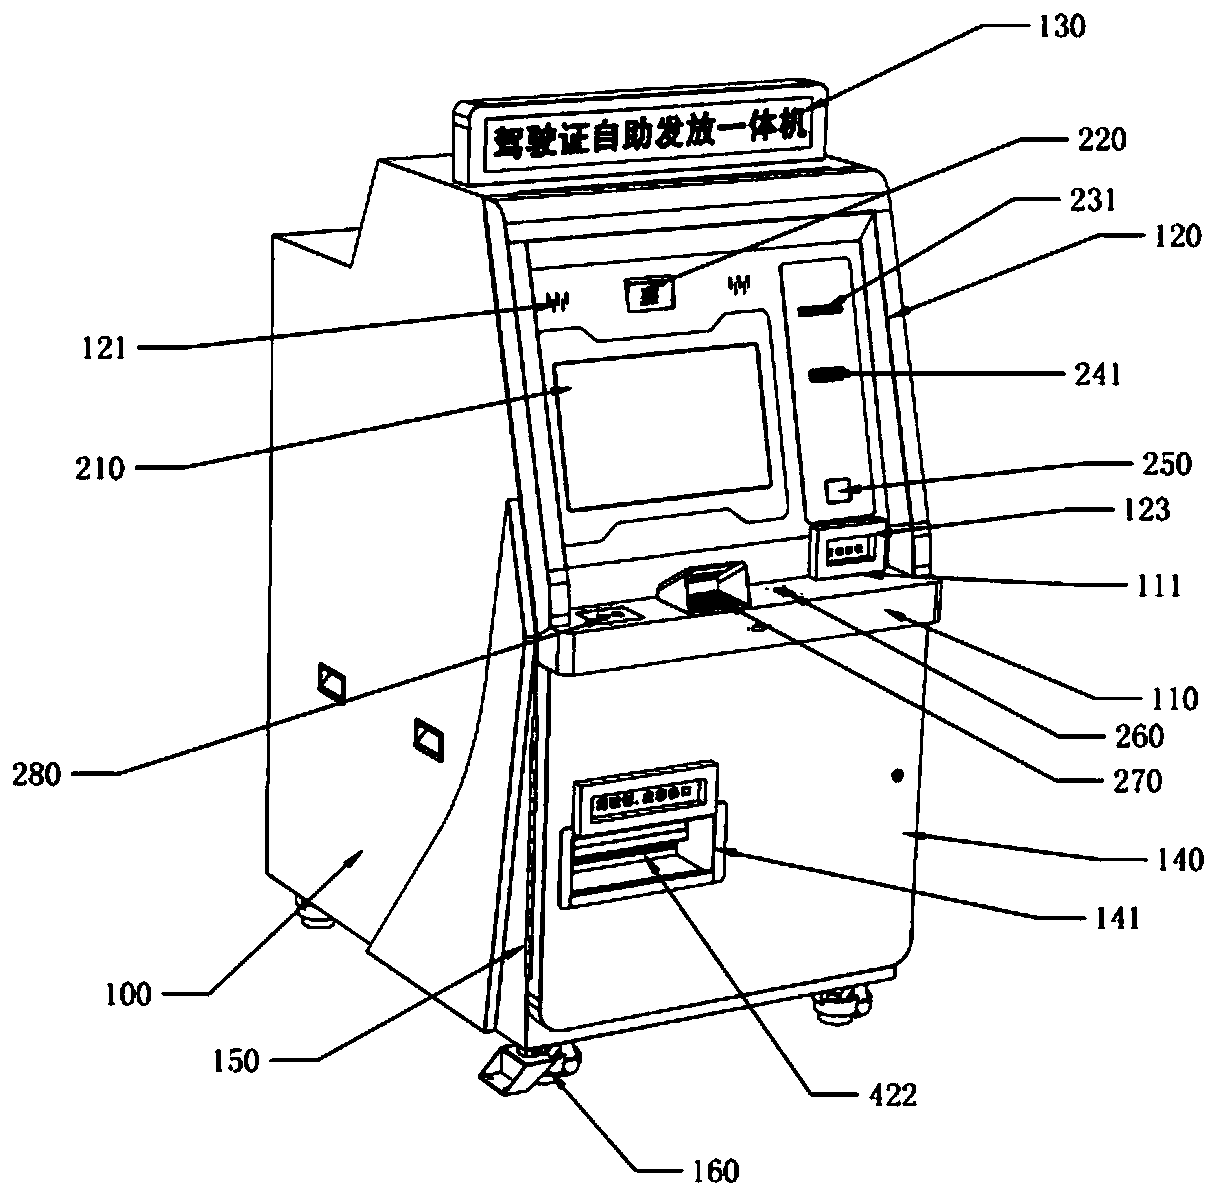 Control method for drivers' license self-service issuing machine